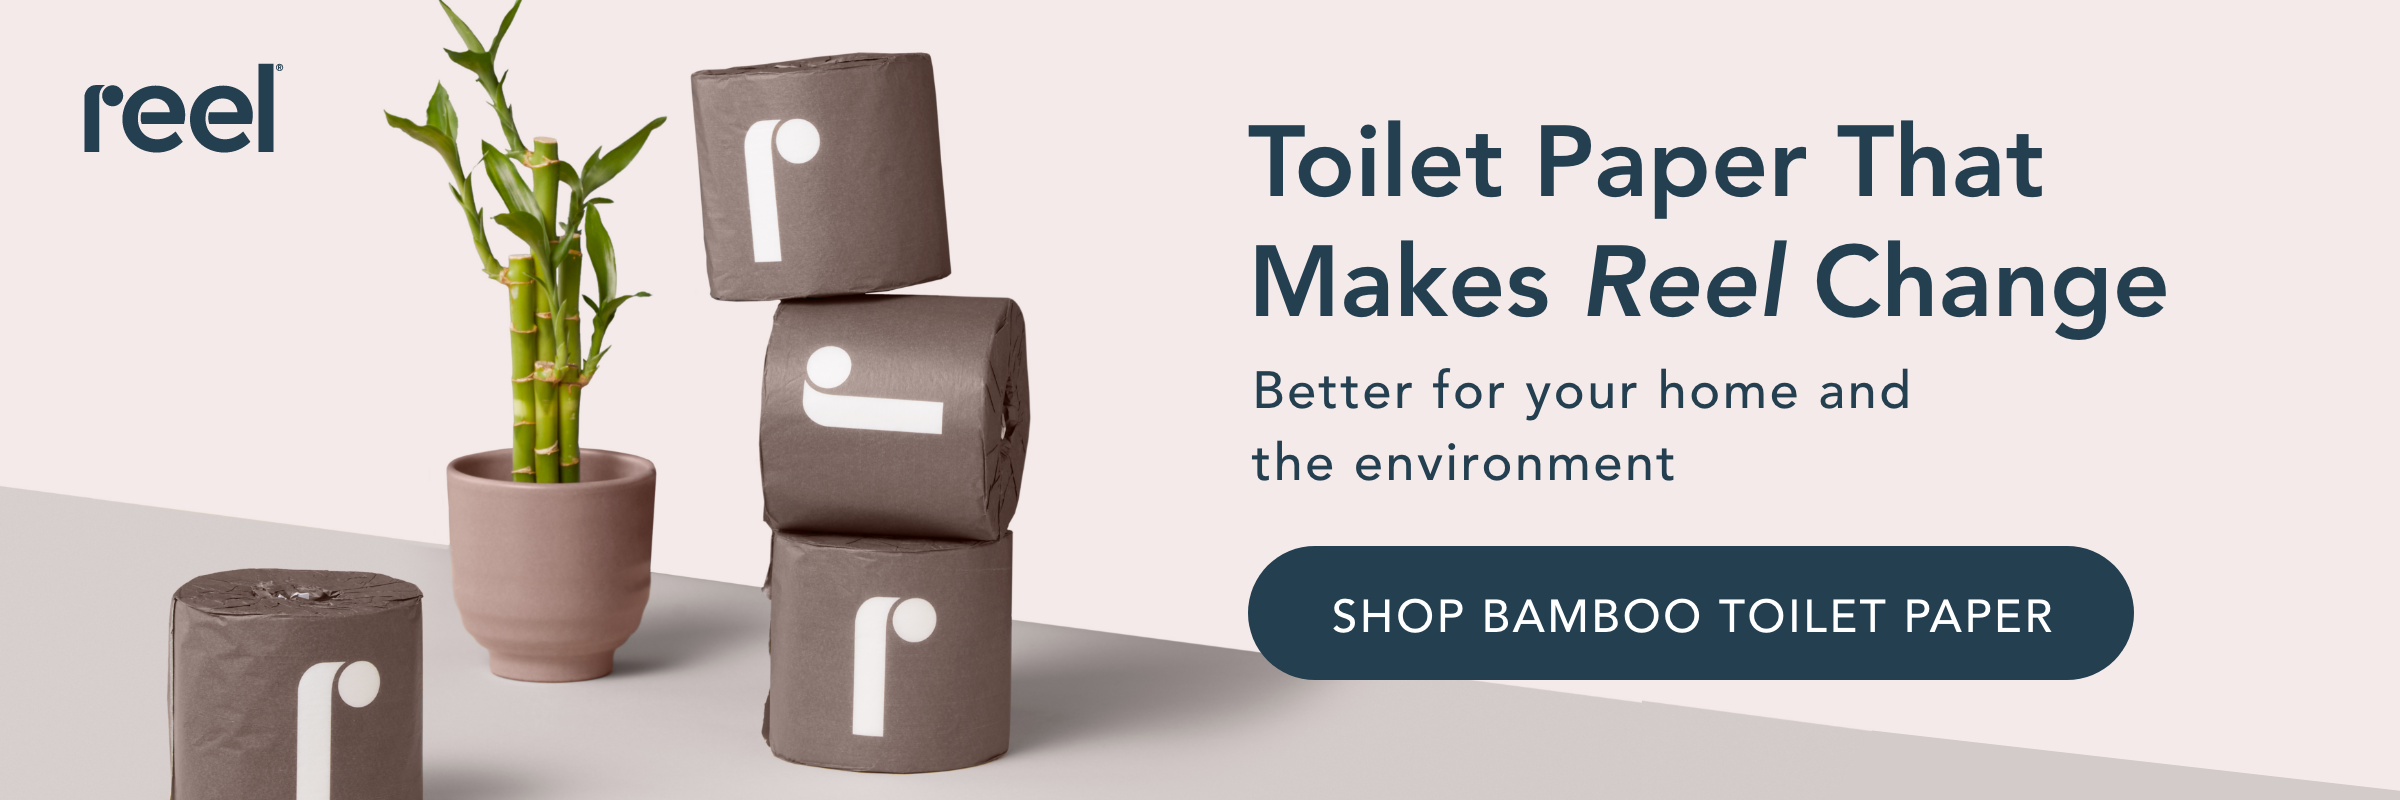 Bamboo Toilet Paper 101: What is It?